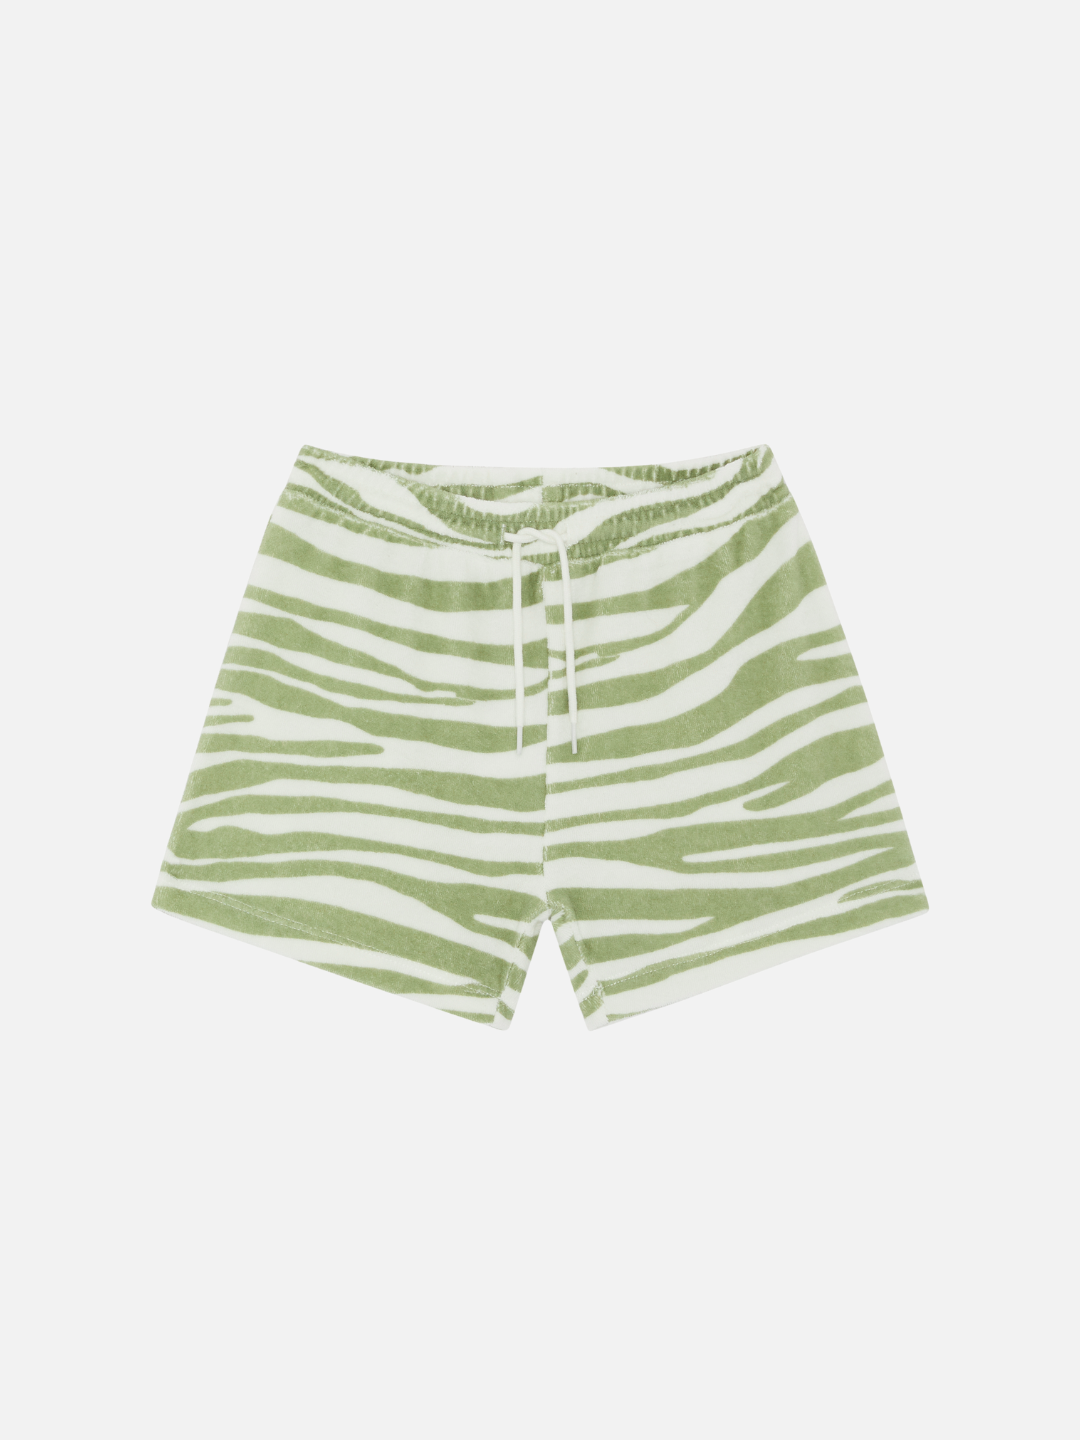 A front view of the kid's terry towel shorts in green tiger